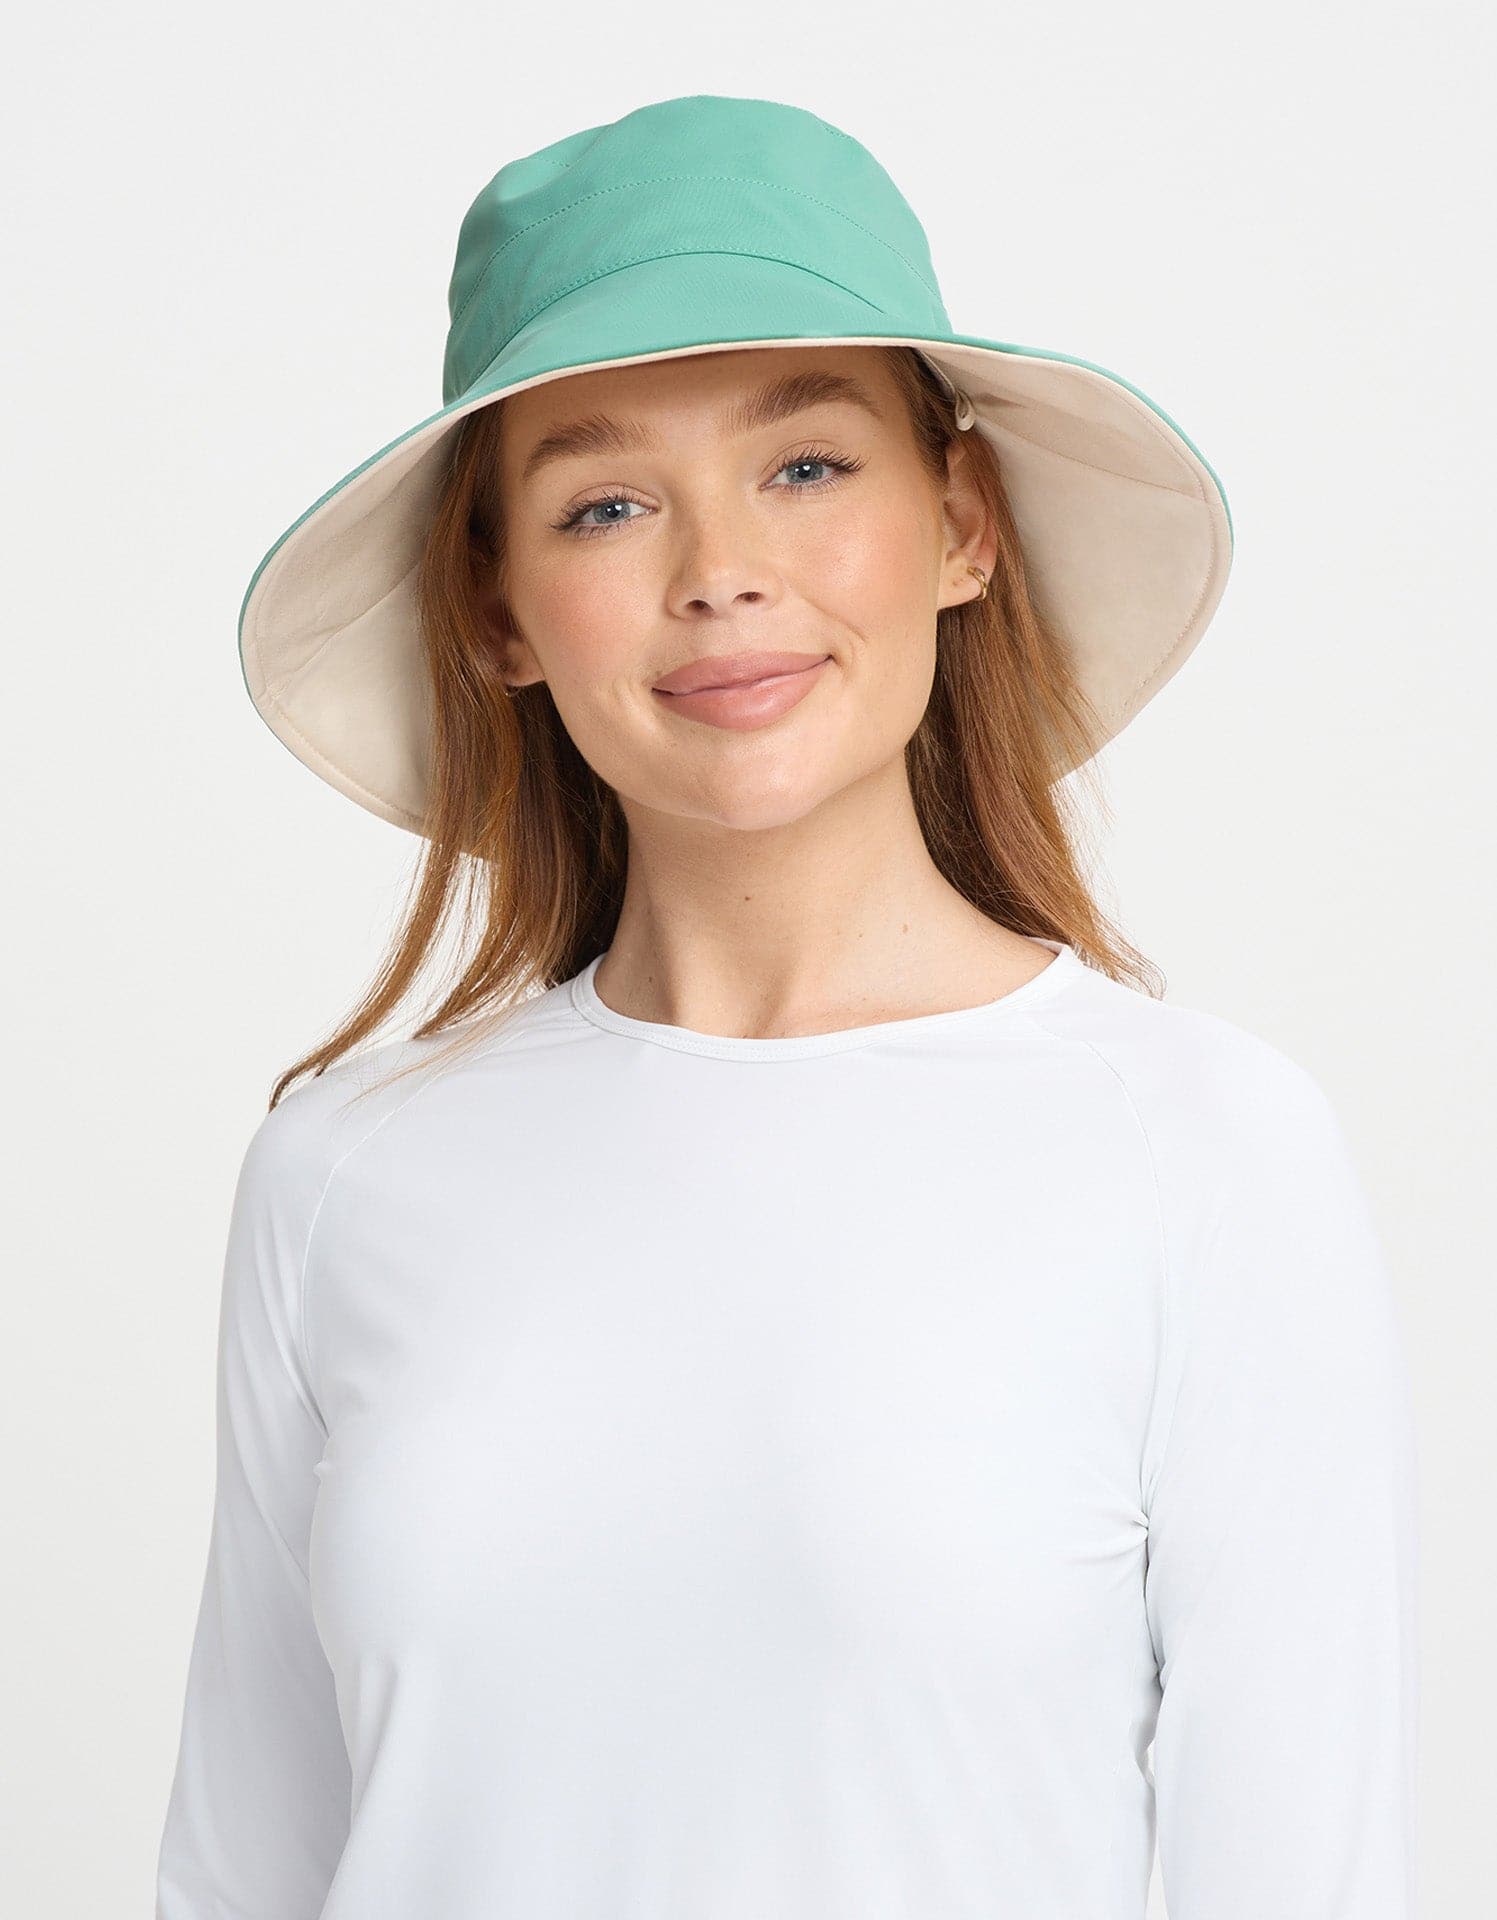 Stylish wide brim reversible sun hat and long sleeve sunprotective t-shirt  for ladies from #solbari #sunprot…